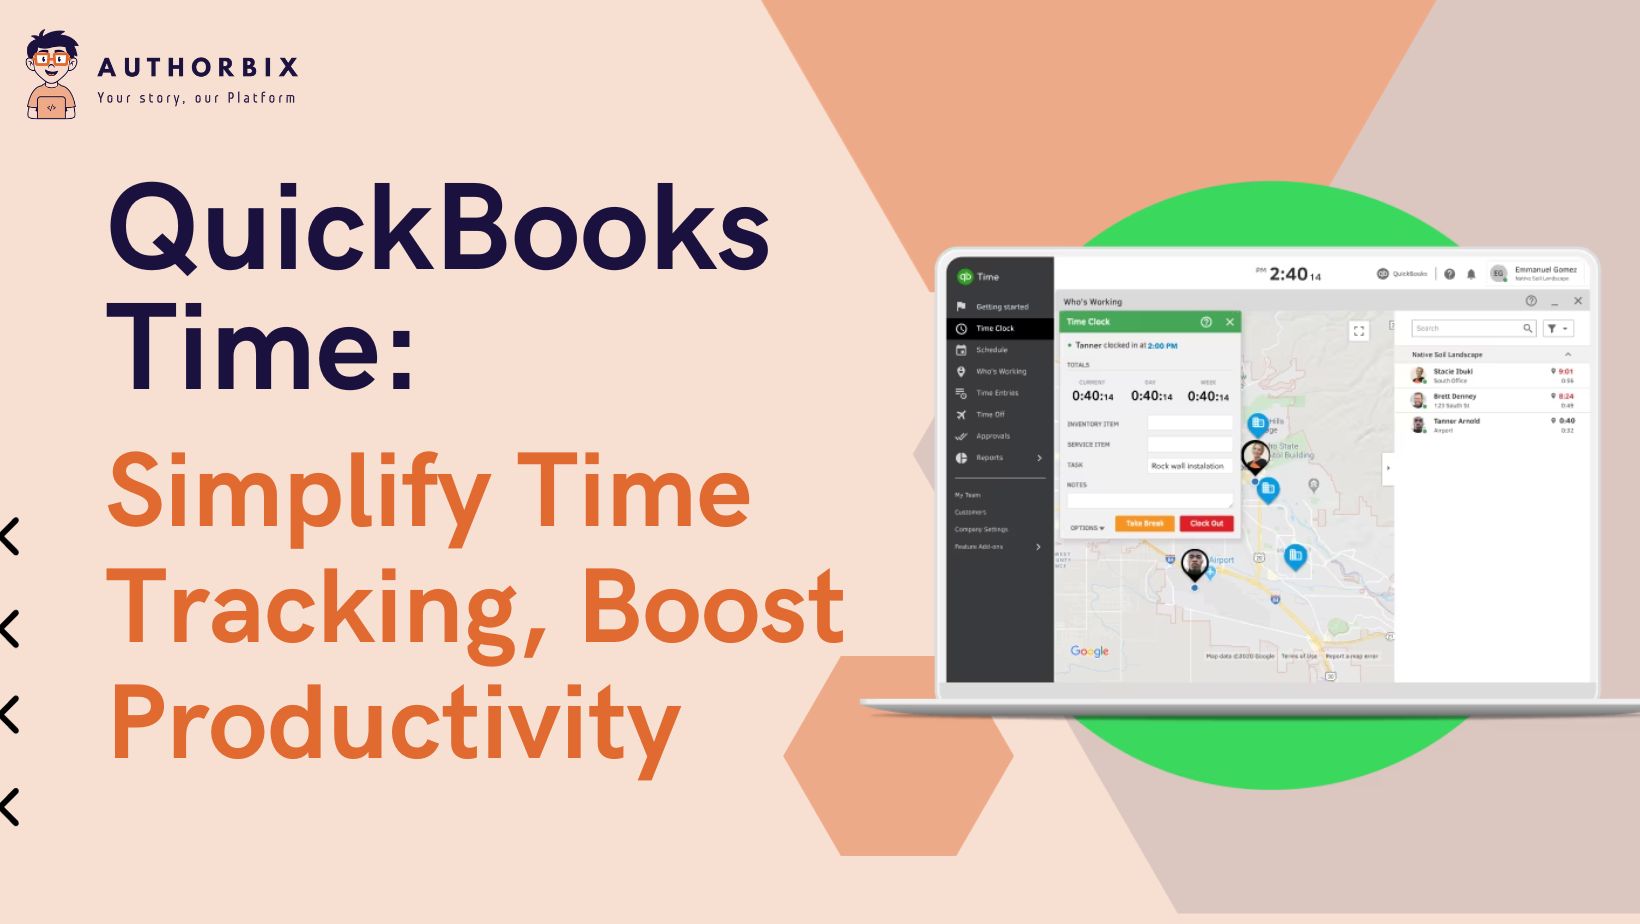 QuickBooks Time: Simplify Time Tracking, Boost Productivity